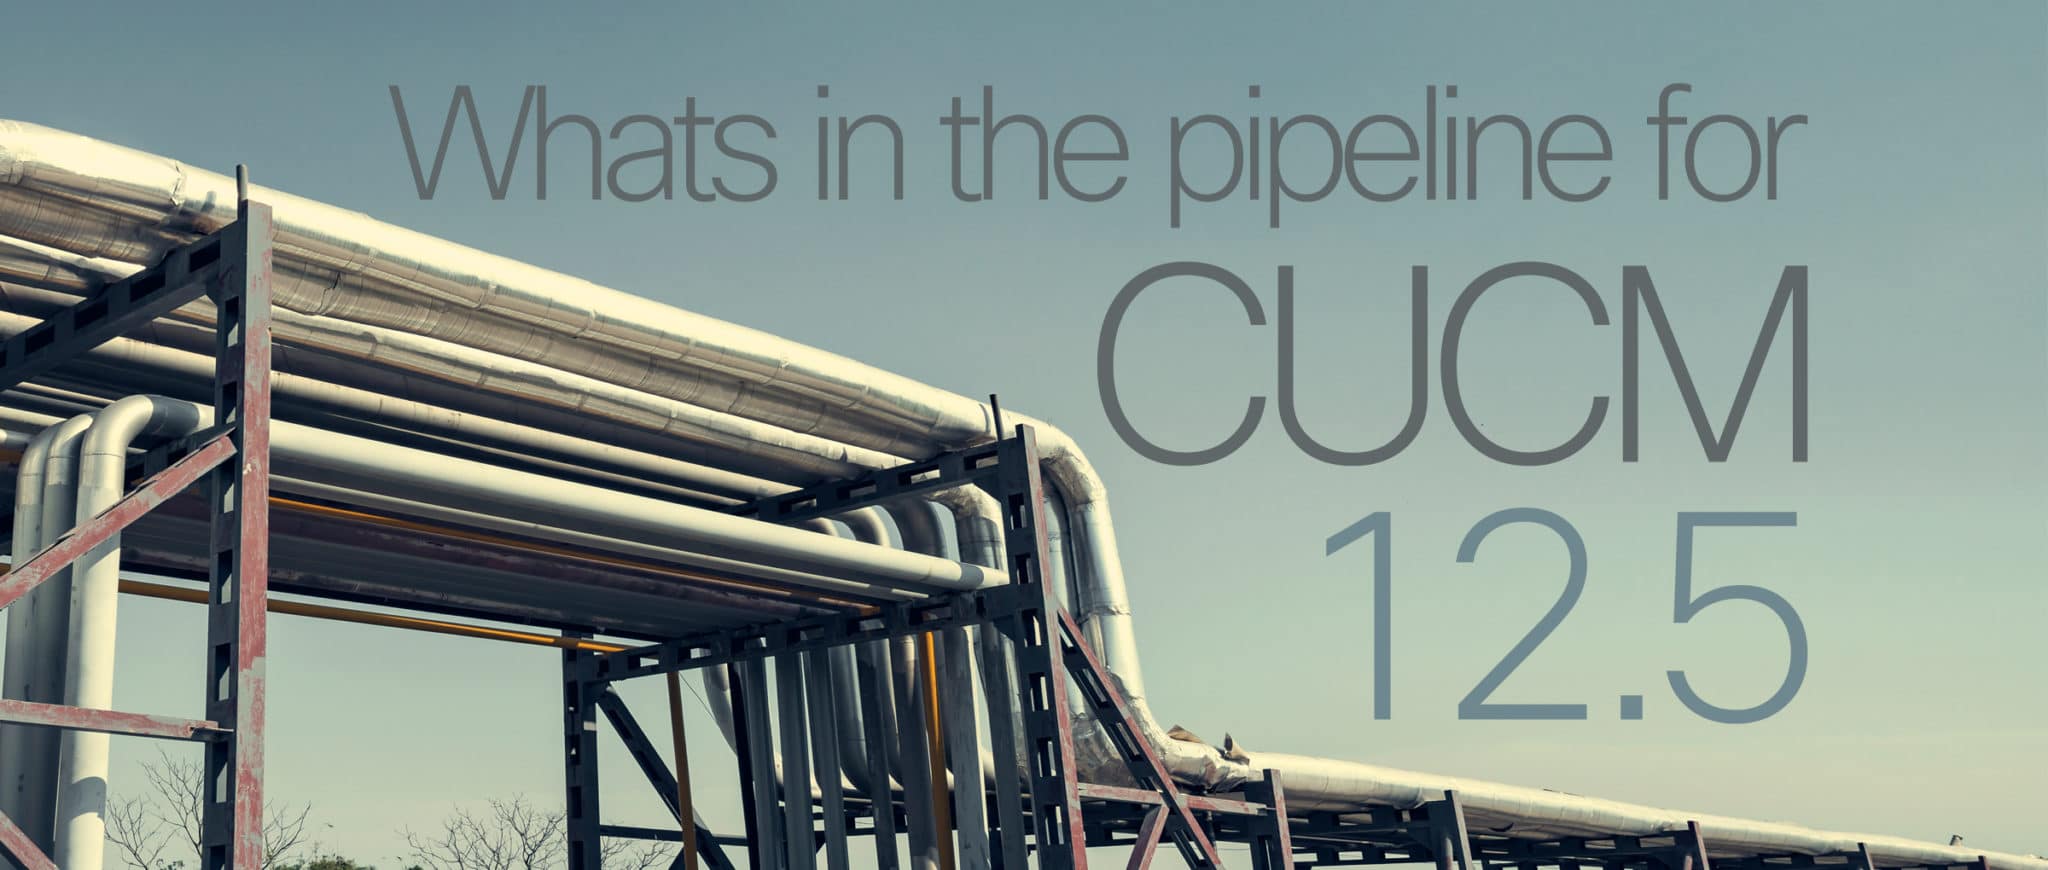 Cucm 12 5 What S In The Pipeline For Cucm 12 5 Tesrex